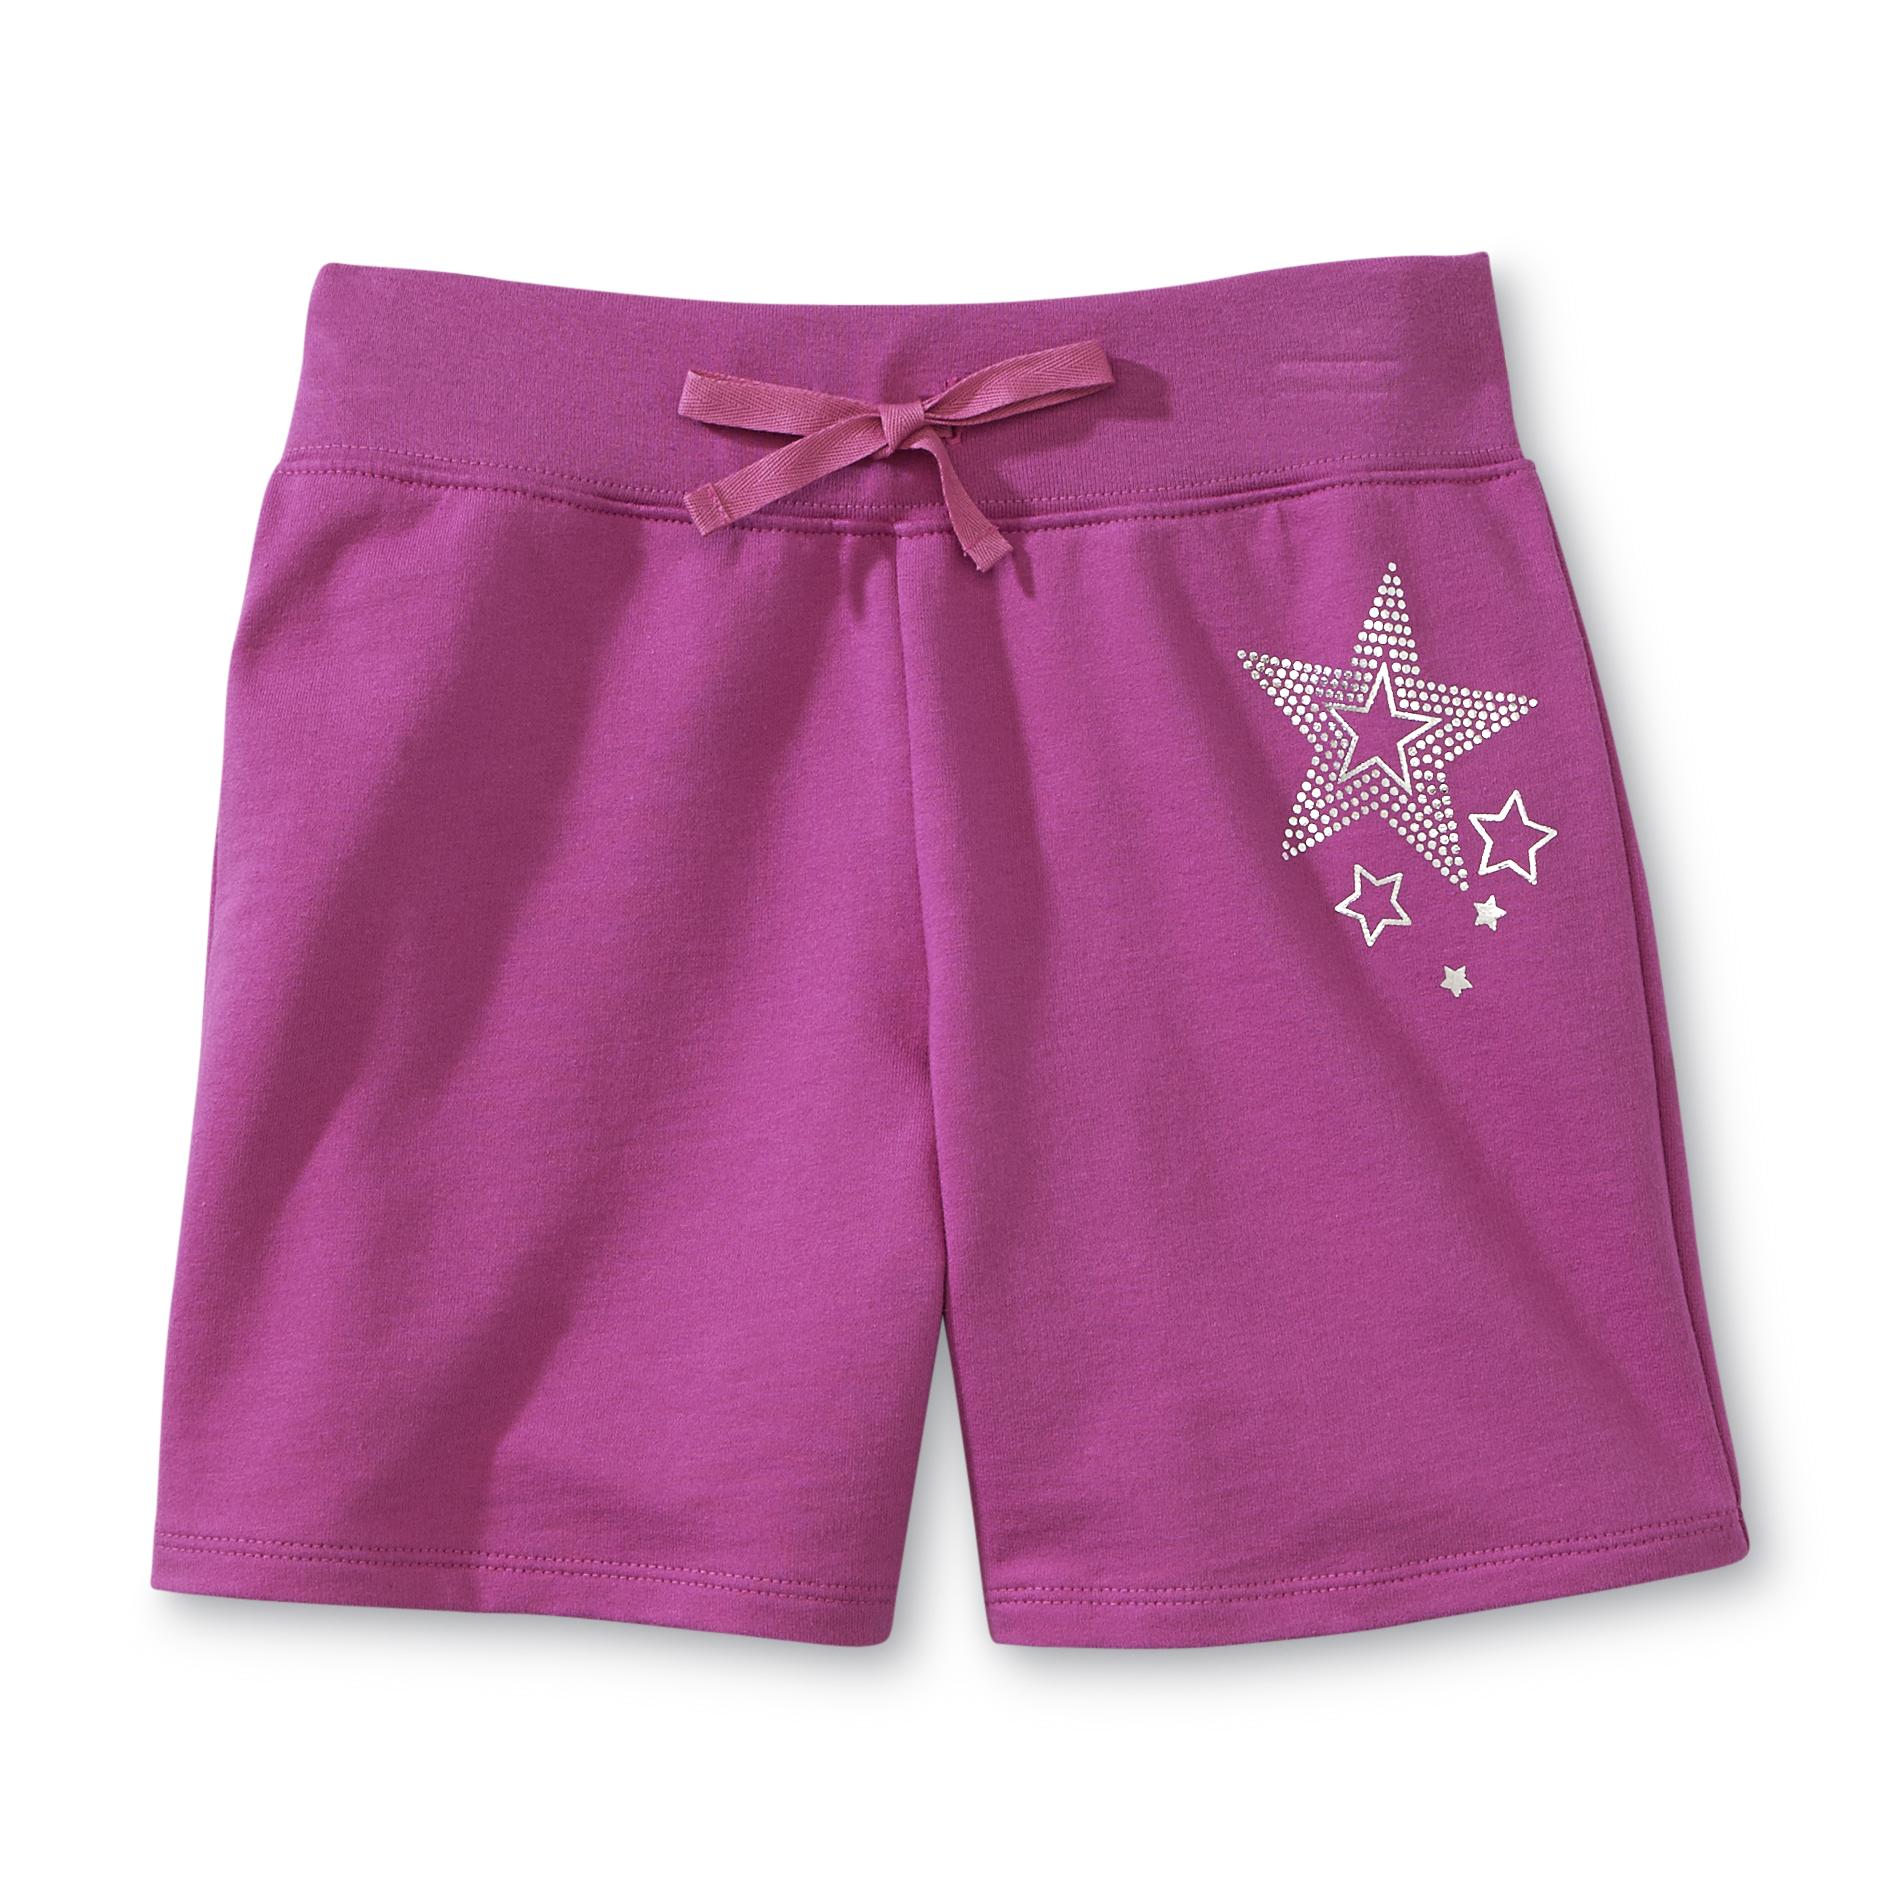 Canyon River Blues Girl's French Terry Shorts - Stars